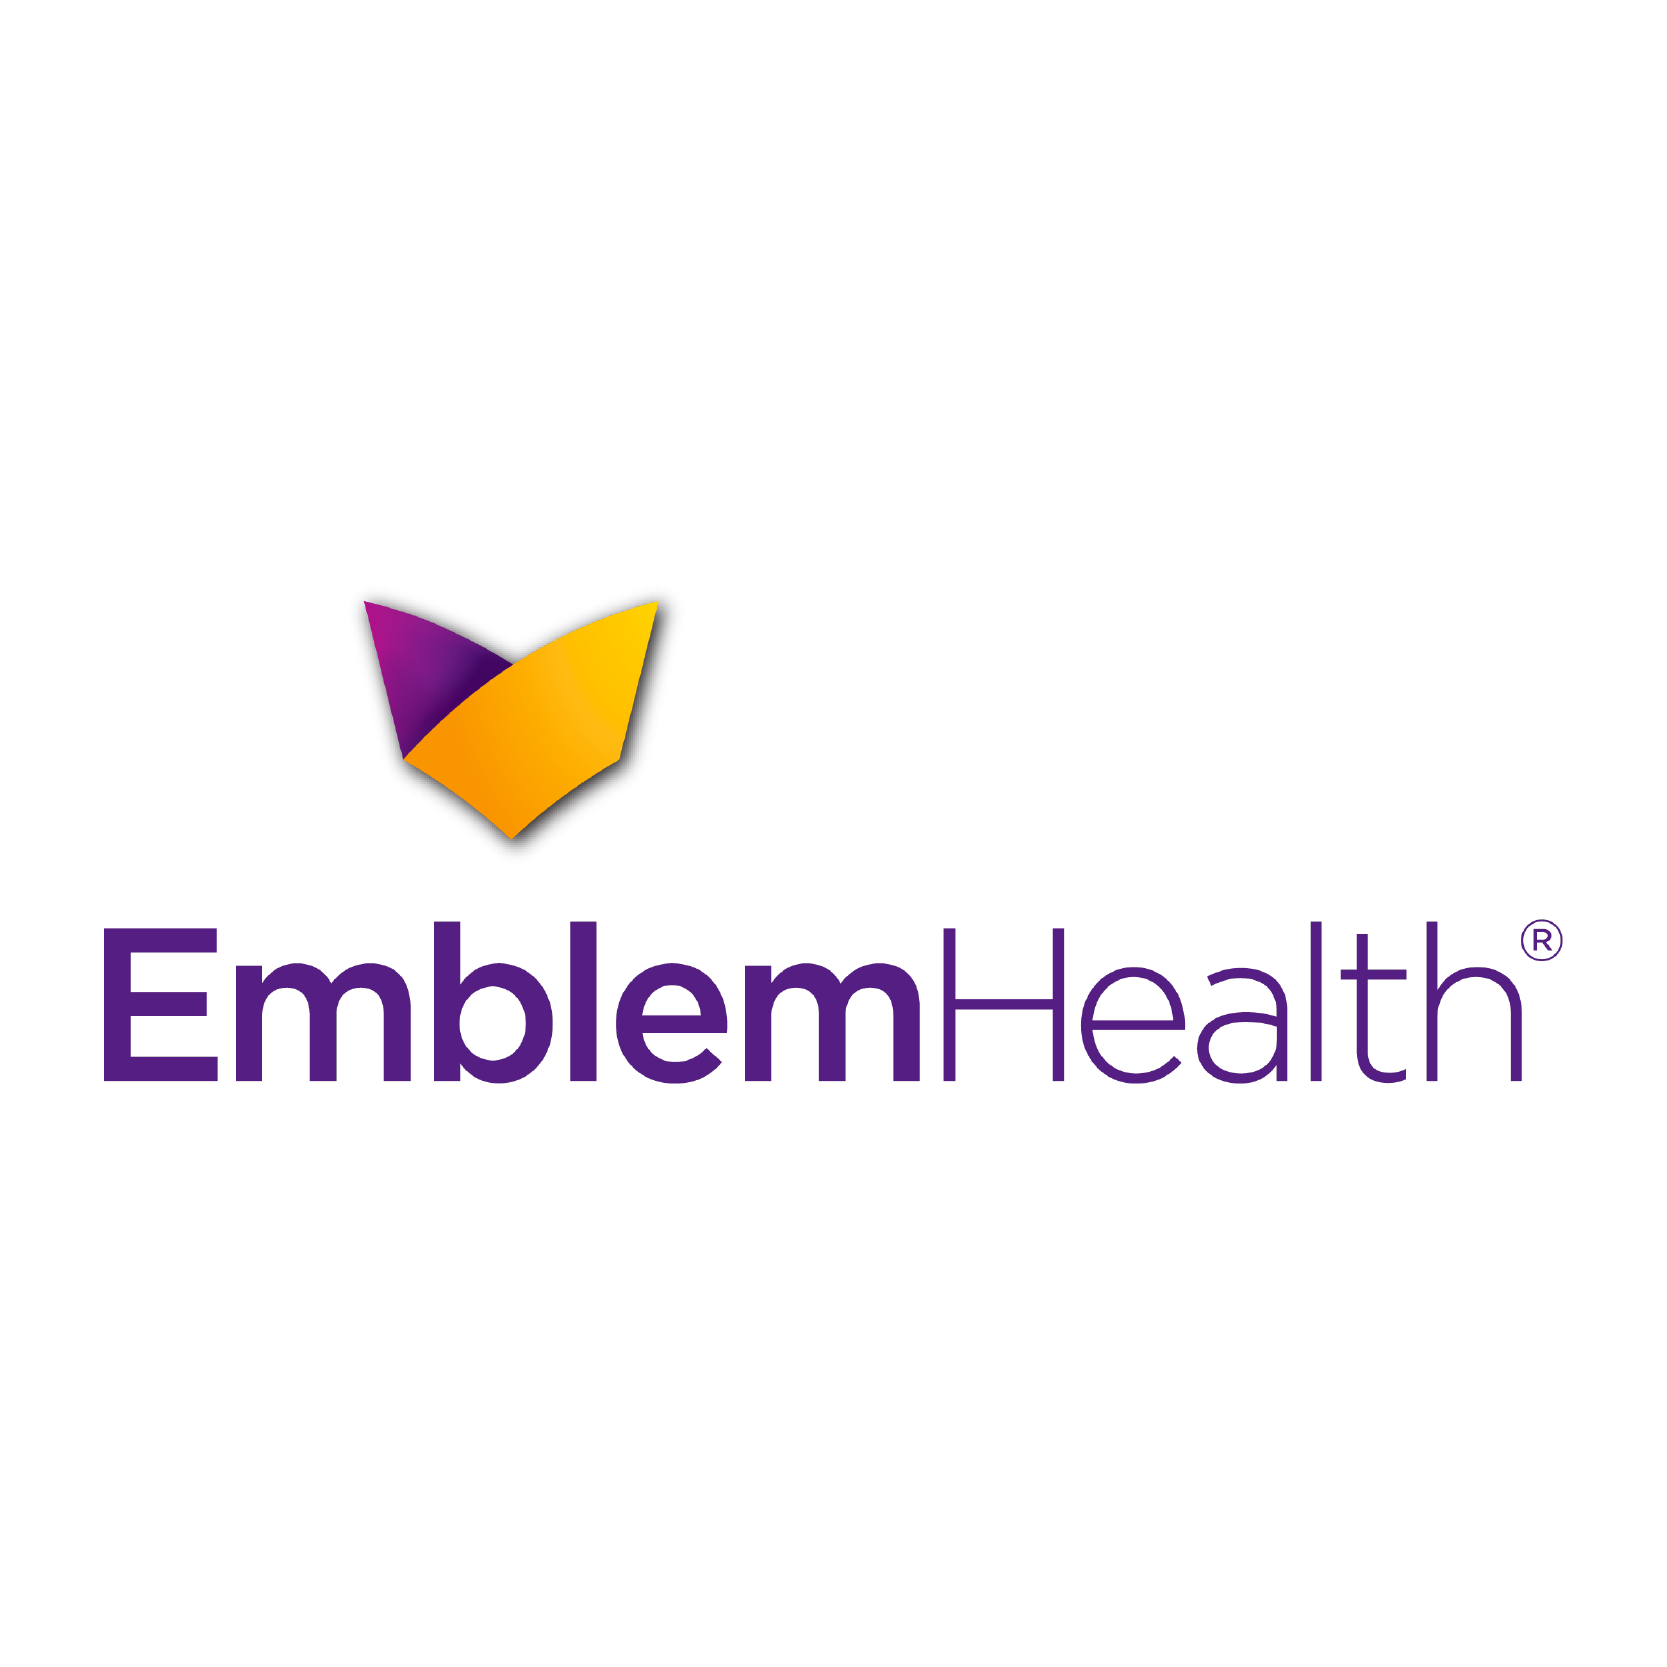 Emblemhealth ny state norman miles adventist health